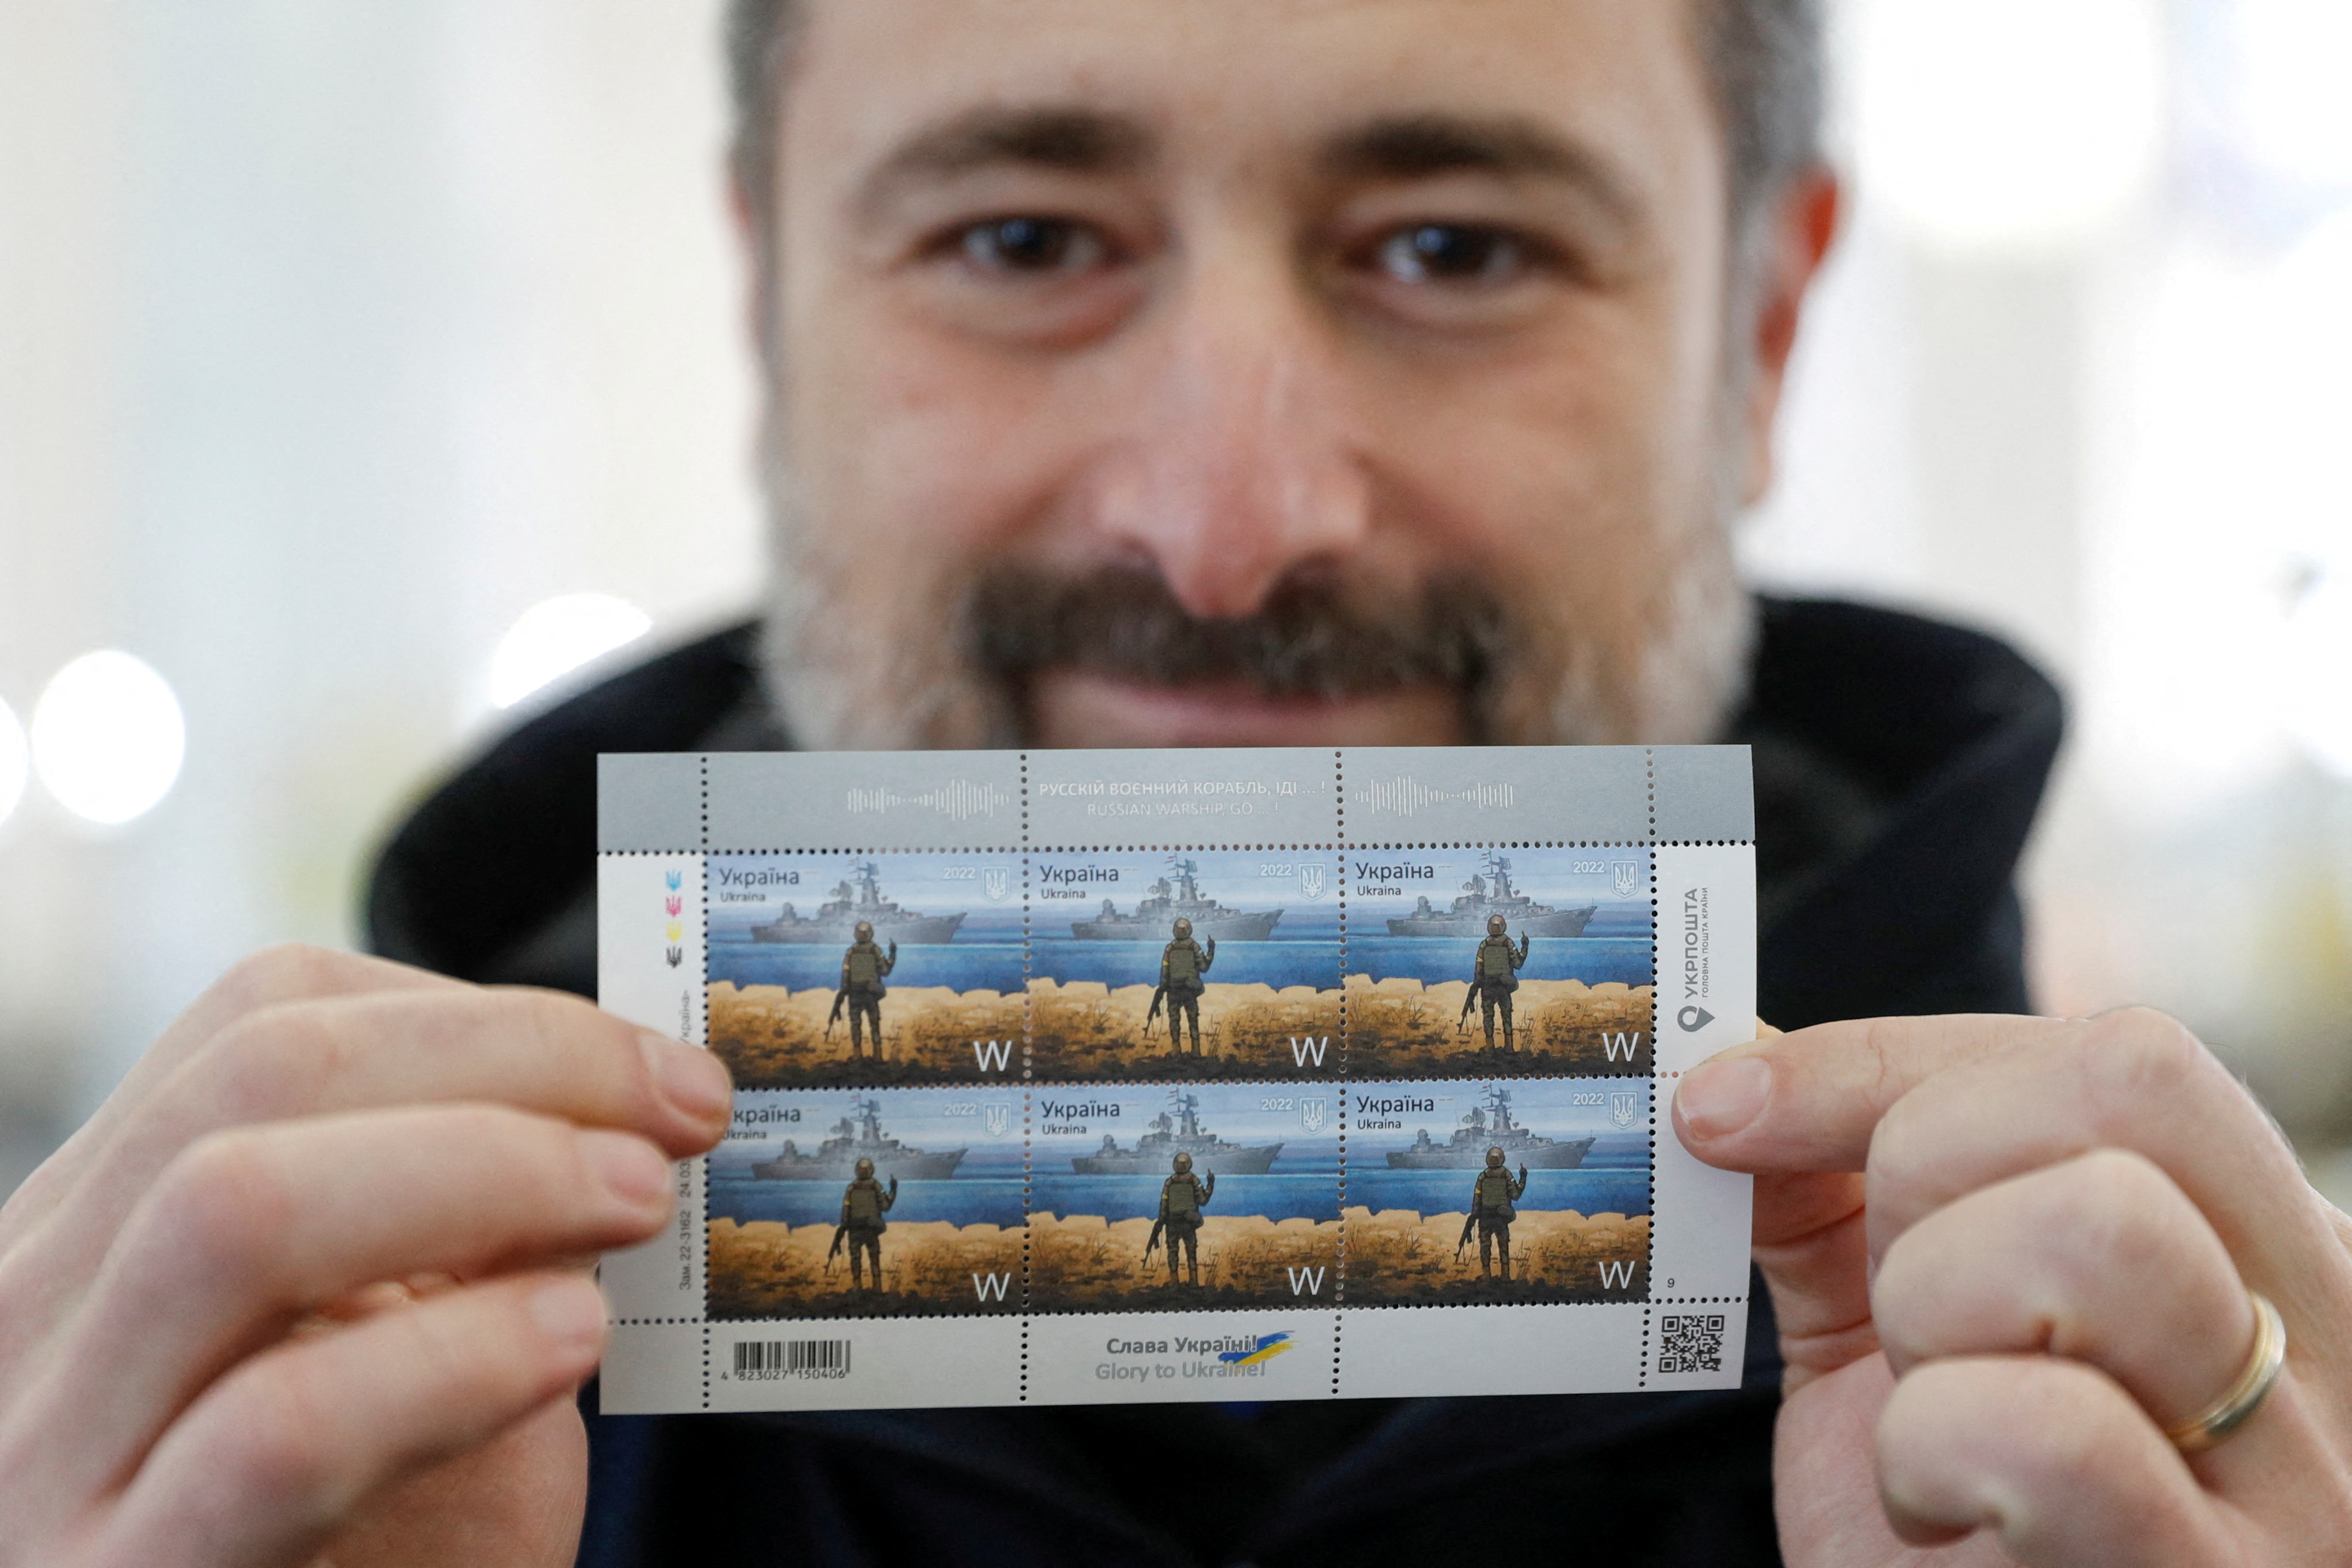 CEO of the Ukrainian post Smilianskyi demonstrates postal stamps showing Ukrainian service member and Russian warship, at company's headquarters in Kyiv